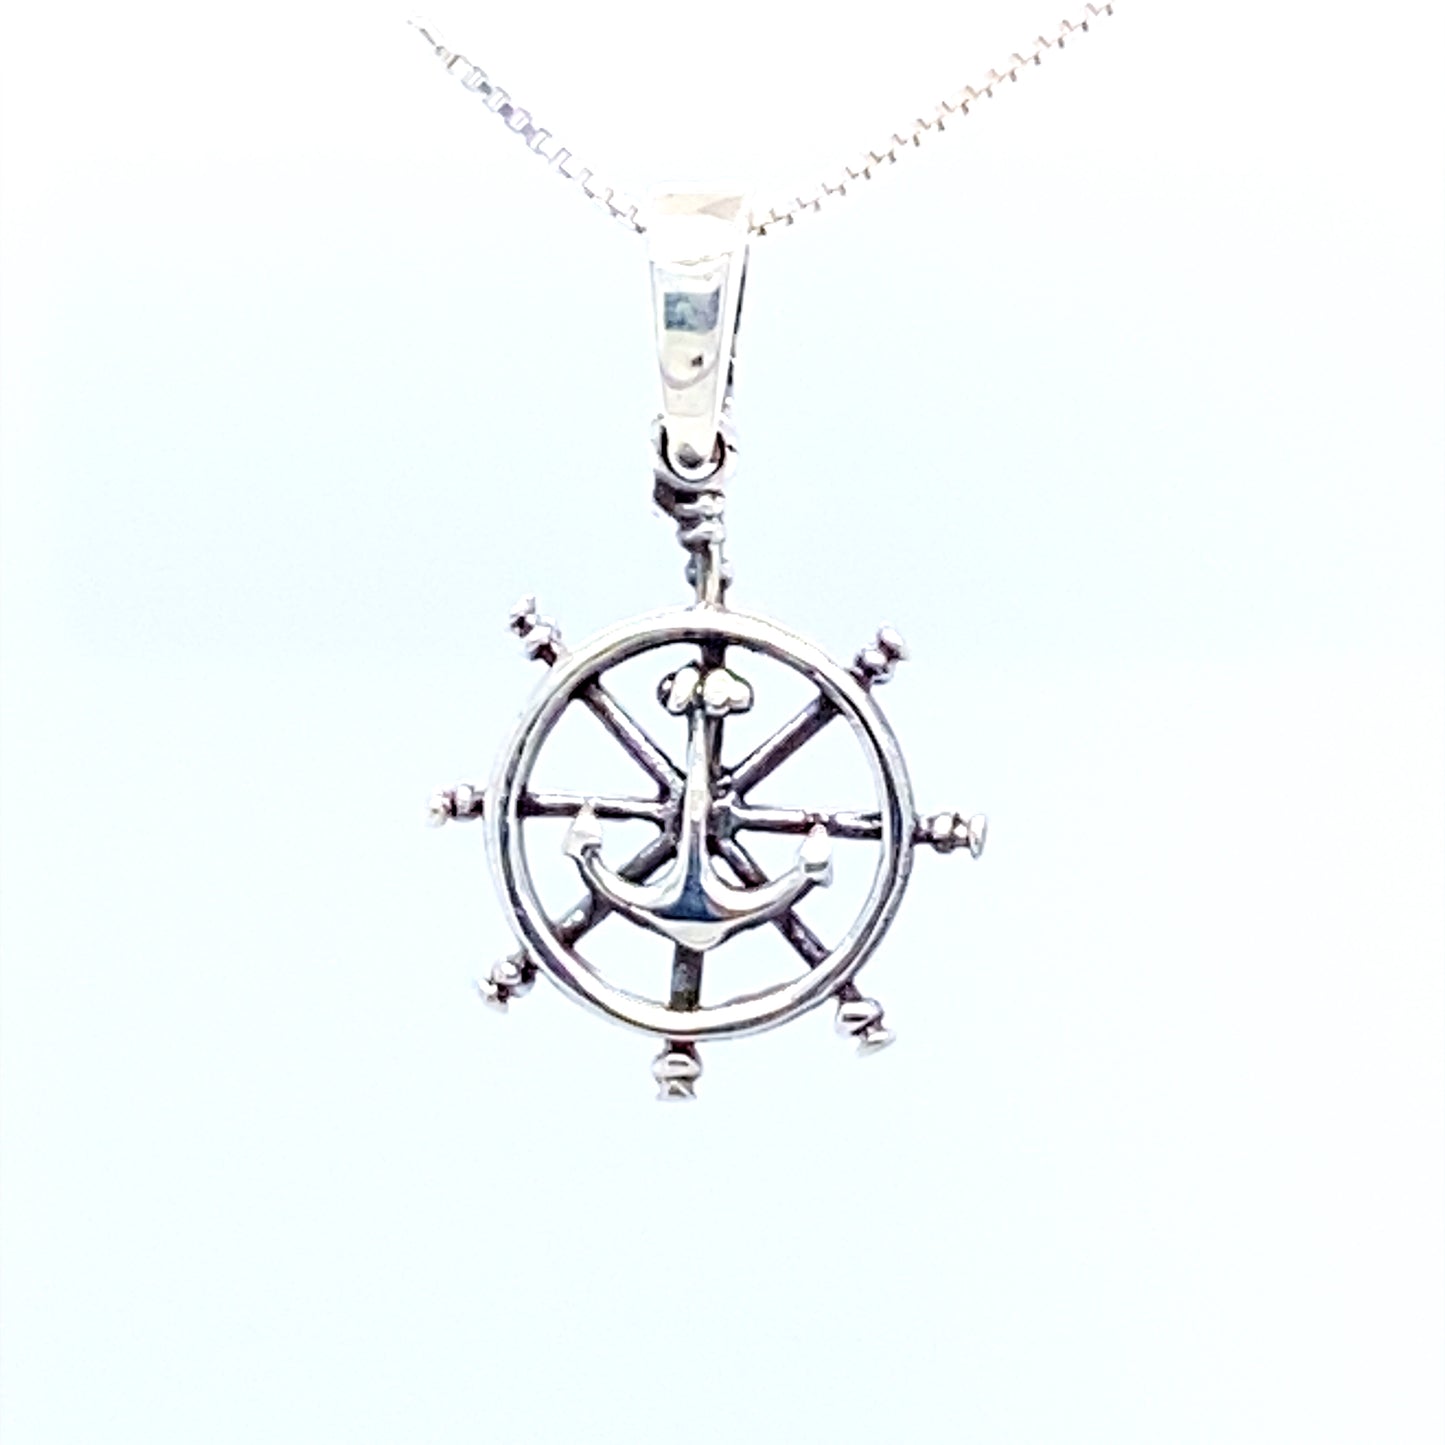 
                  
                    Ships Wheel Charm with Anchor
                  
                